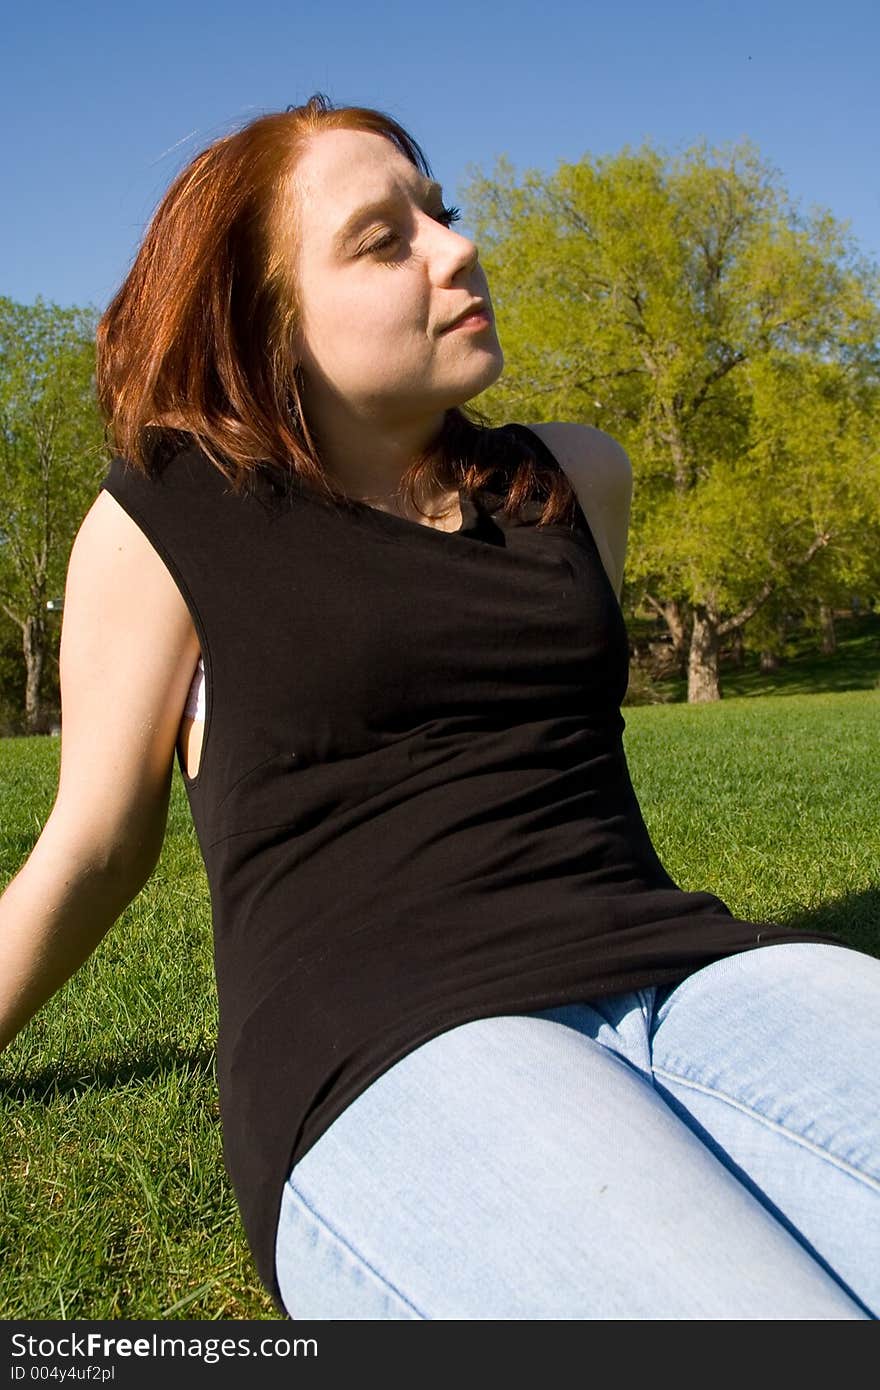 An attractive young lady gazes onward during a warm, summer day in the park. An attractive young lady gazes onward during a warm, summer day in the park.